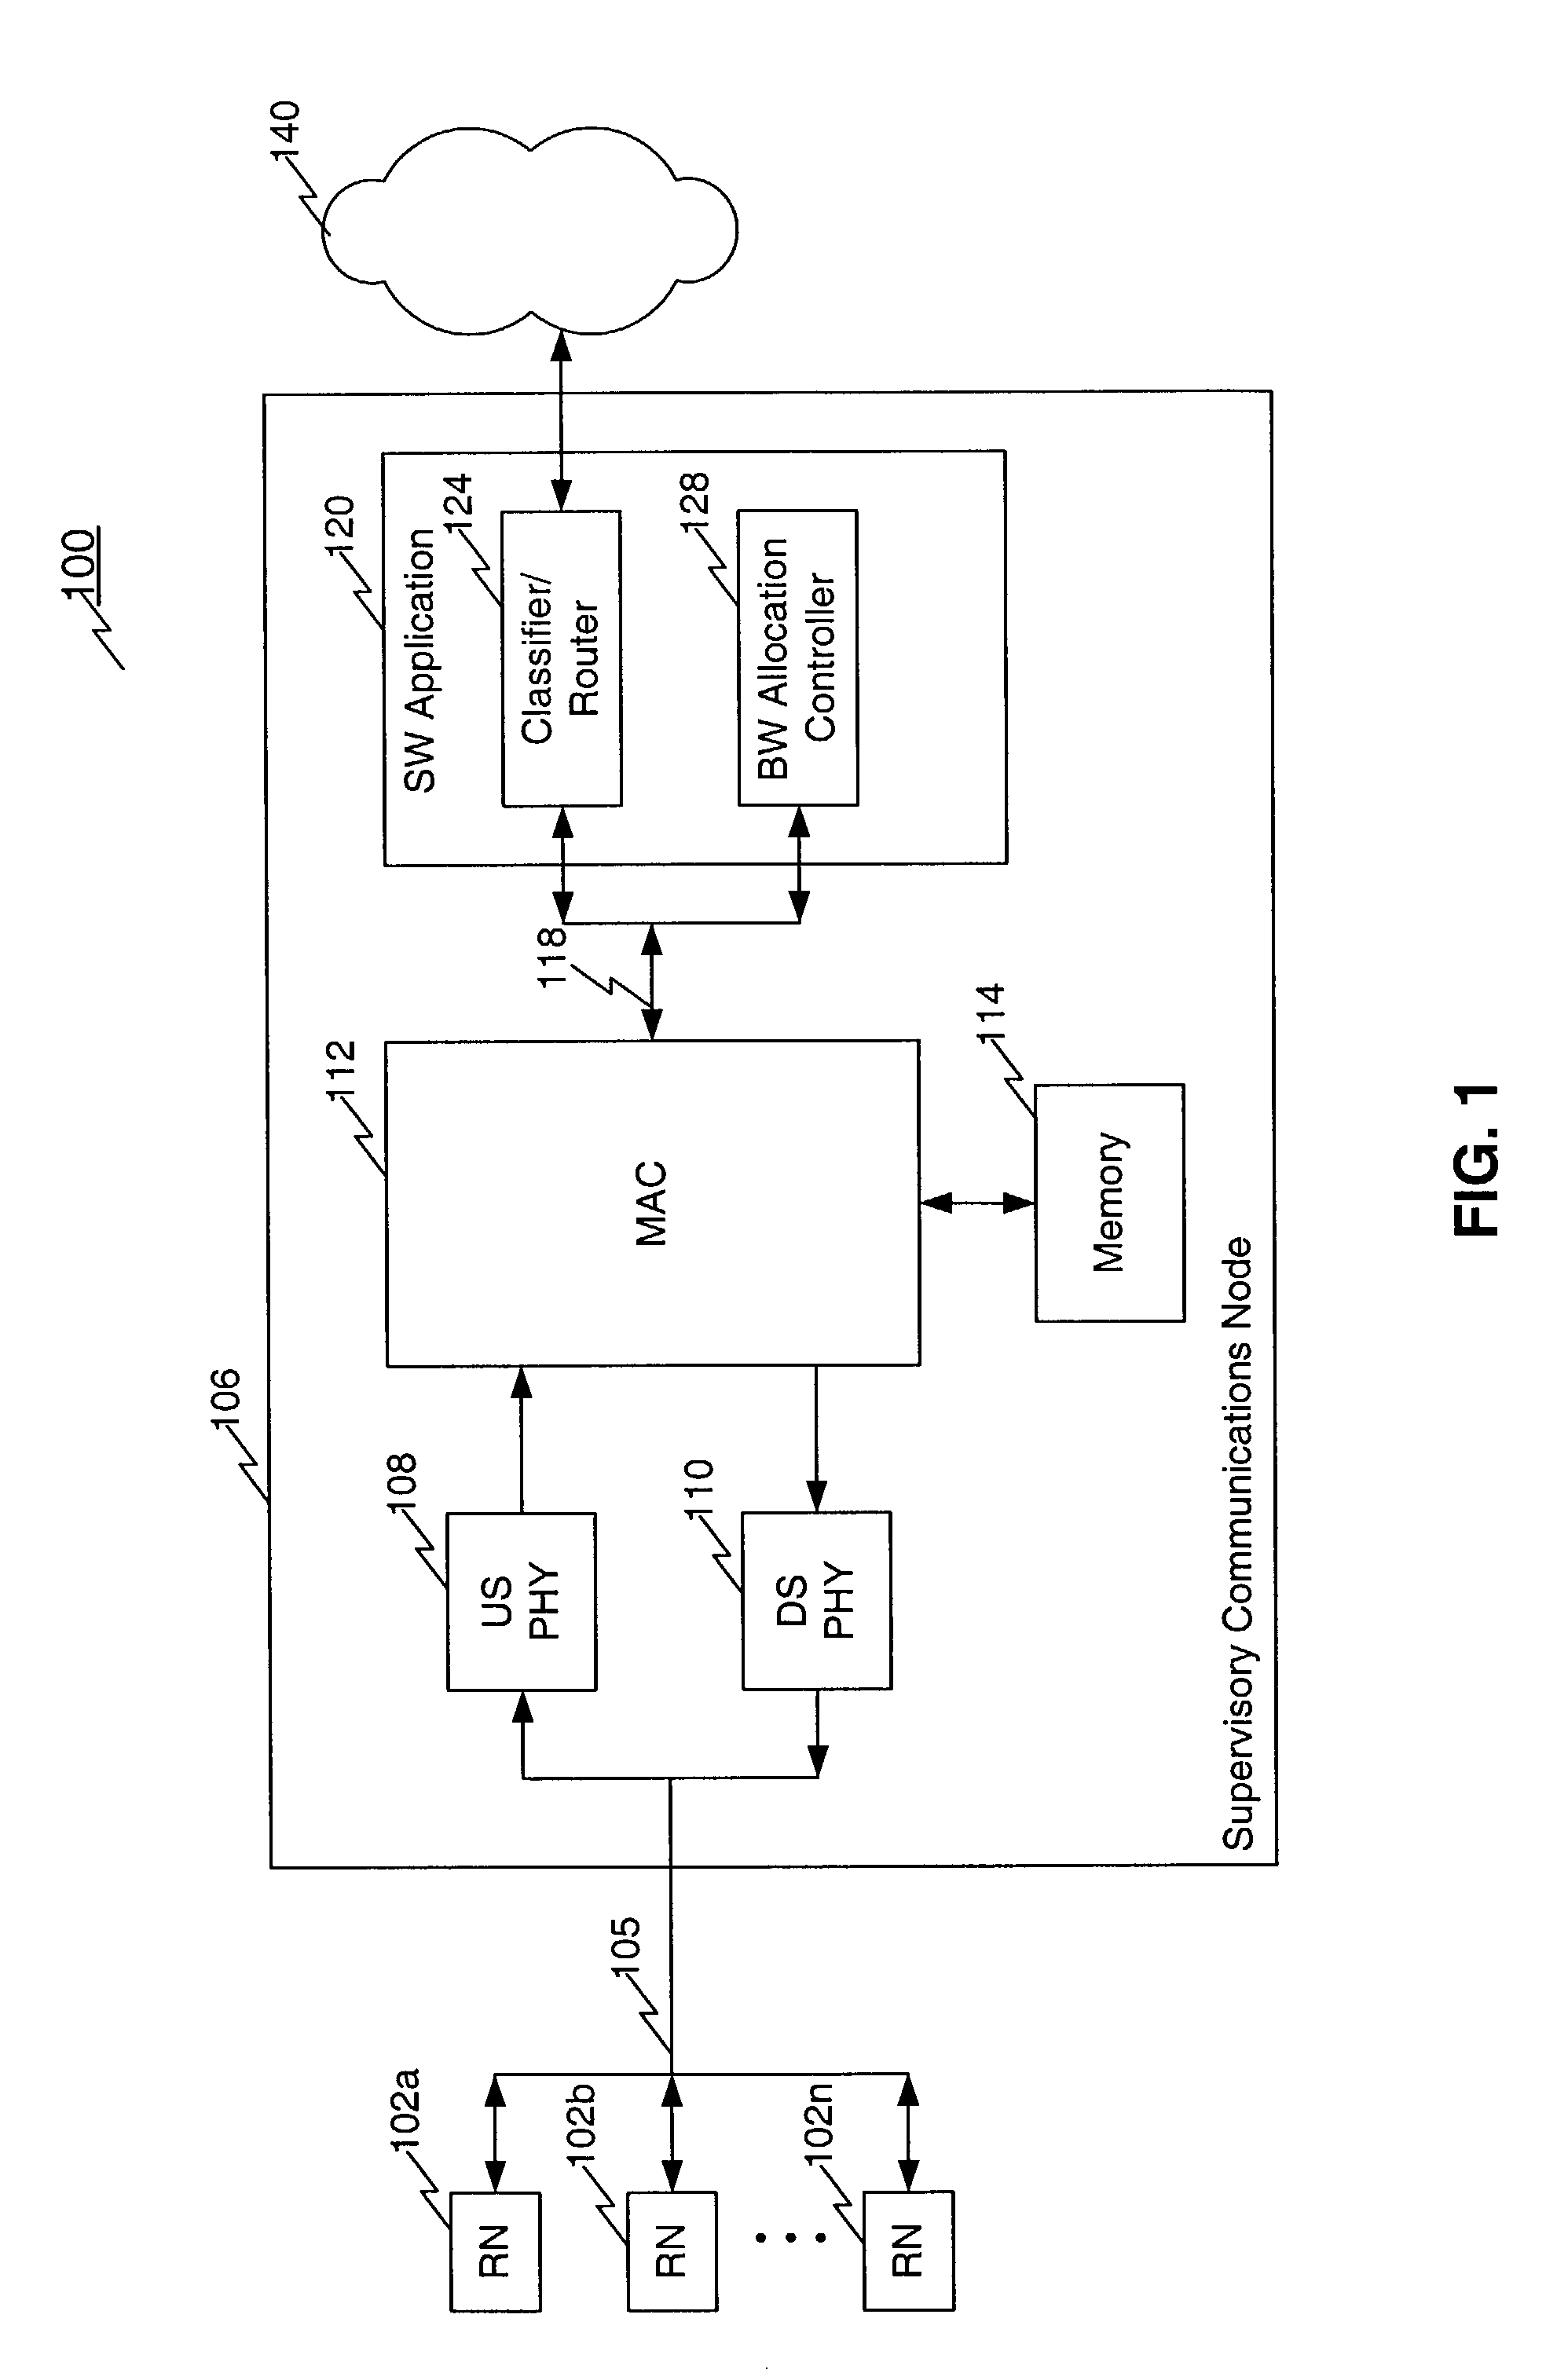 Method, system, and computer program product for synchronizing voice traffic with minimum latency